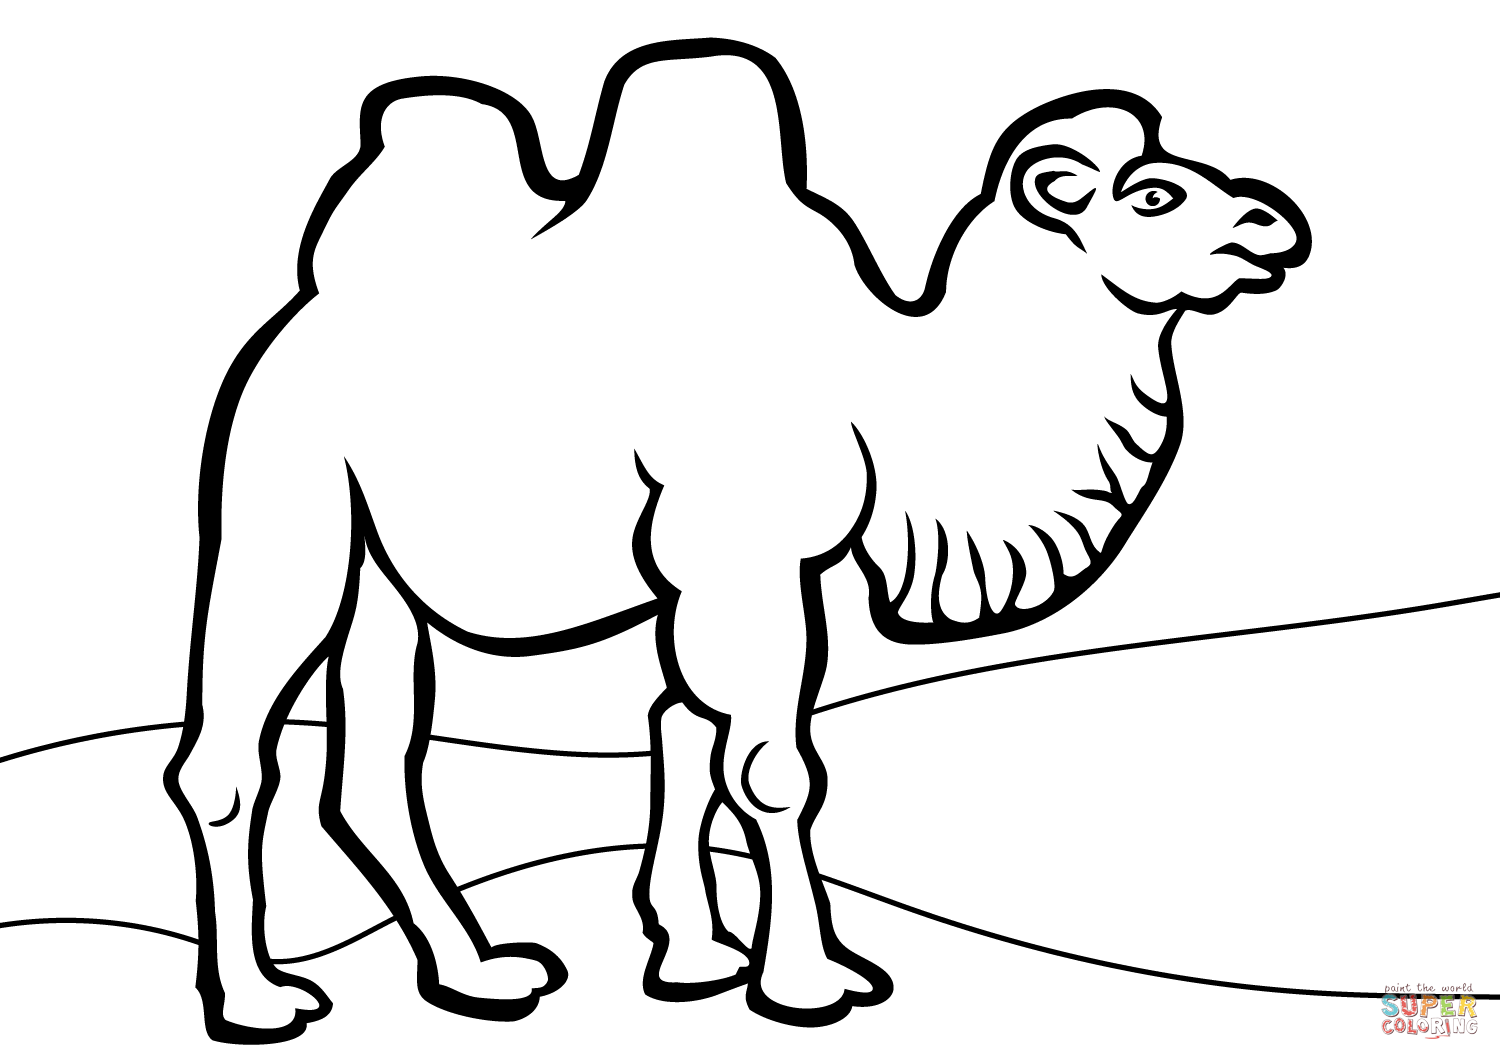 Bactrian Camel coloring page | Free Printable Coloring Pages